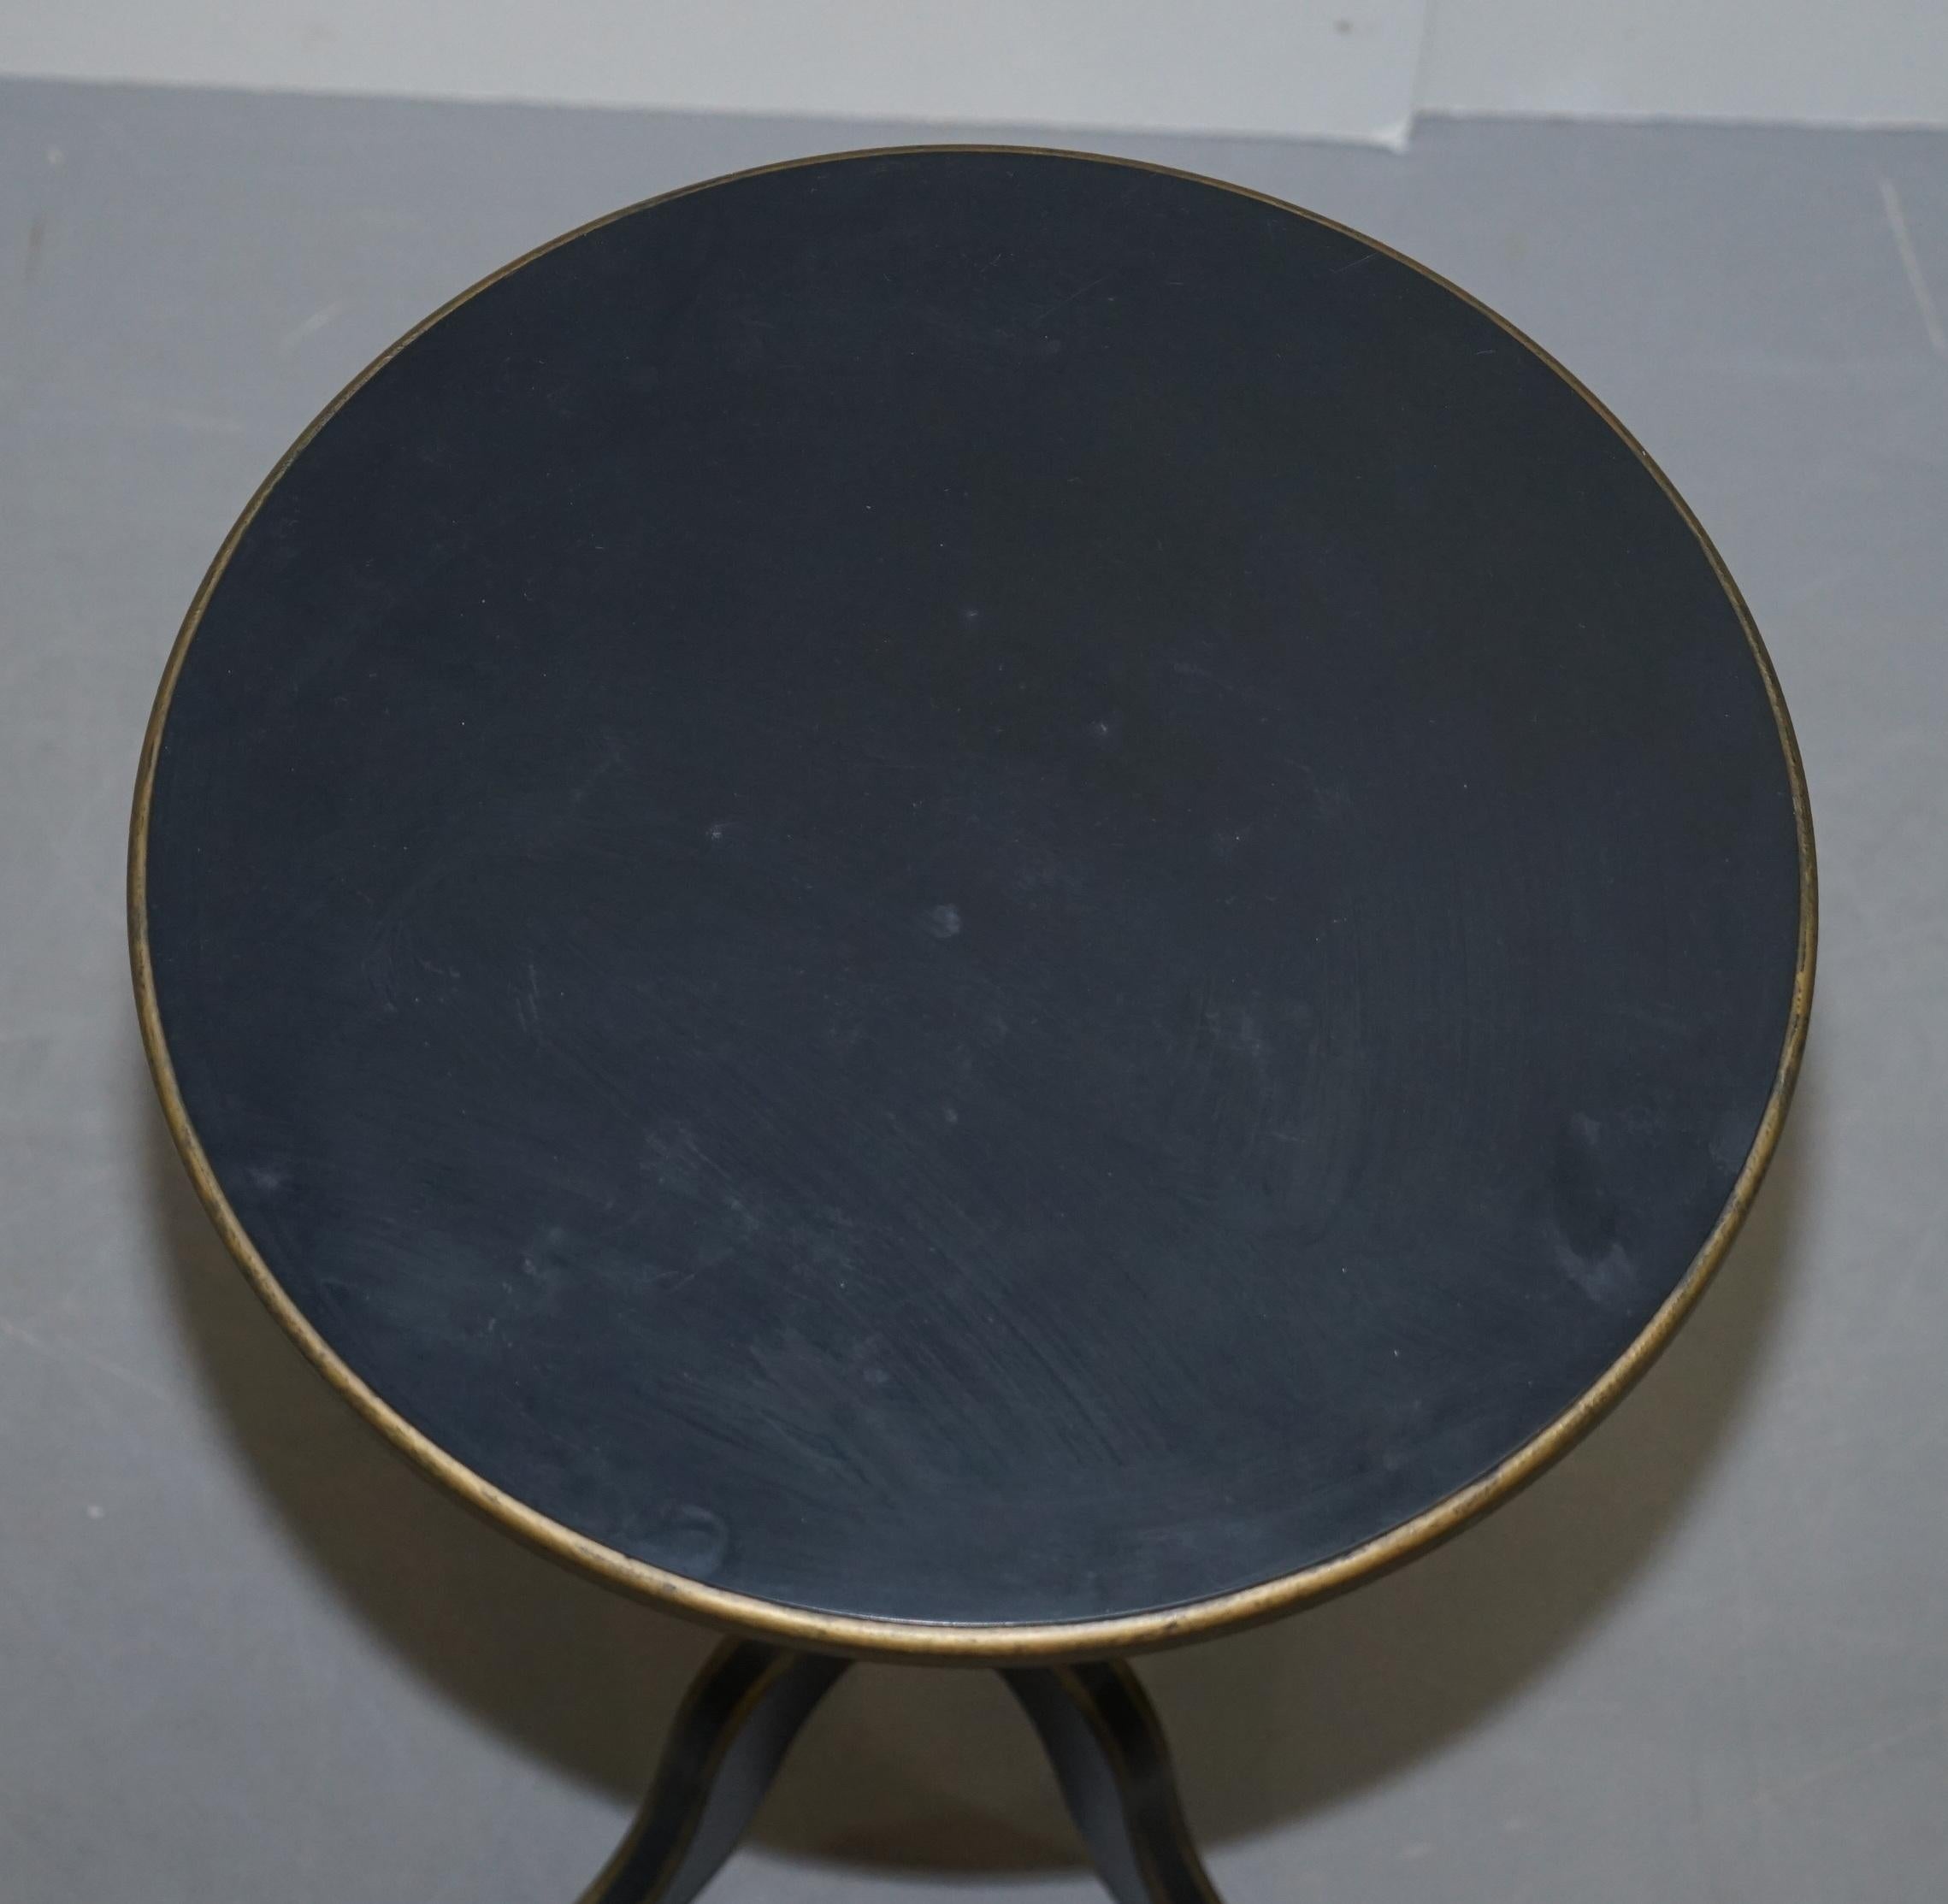 We are delighted to offer for sale this nice antique style ebonized side table with gold gilt detailing and tripod base

I have a matching pair of these listed under my other items which are slightly smaller

We have cleaned waxed and polished